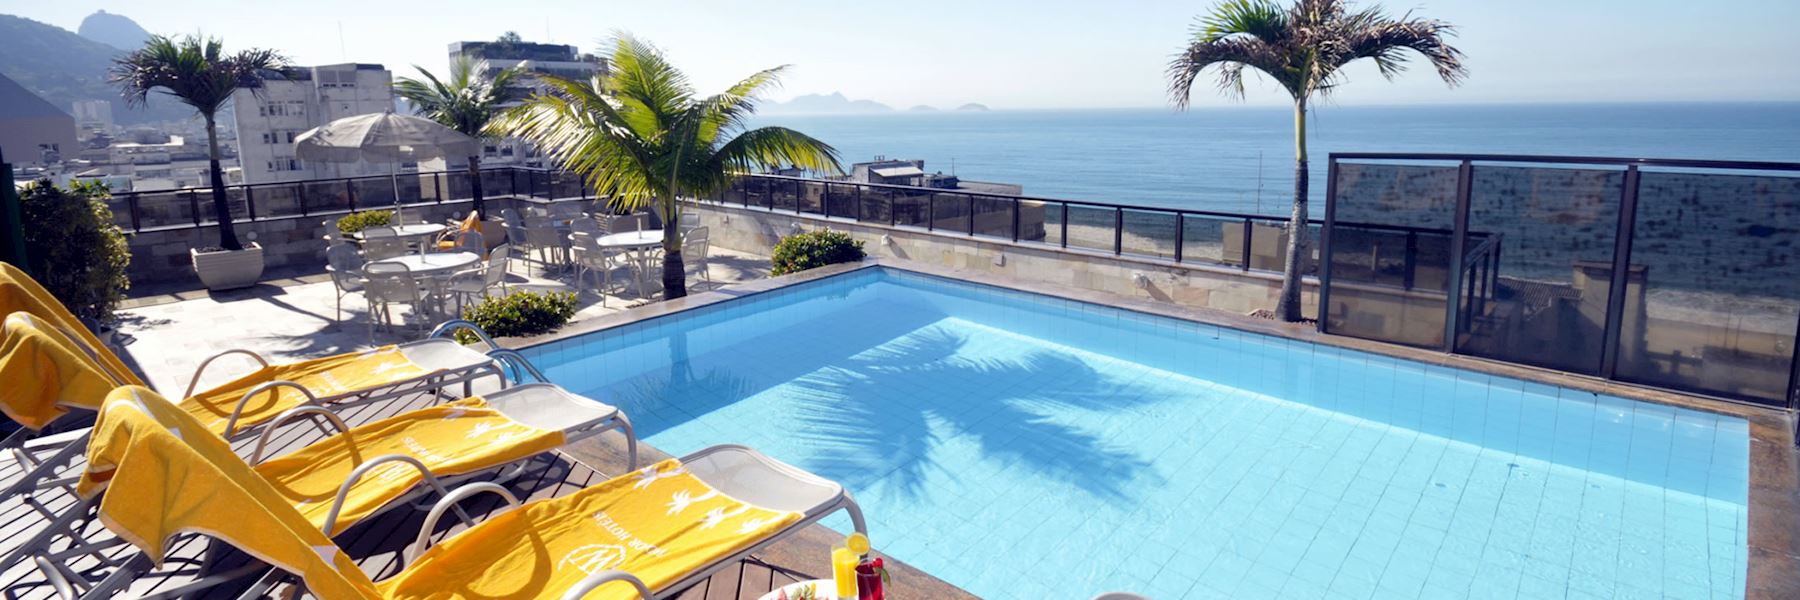 The Windsor Palace Hotels In Rio De Janeiro Audley Travel - 